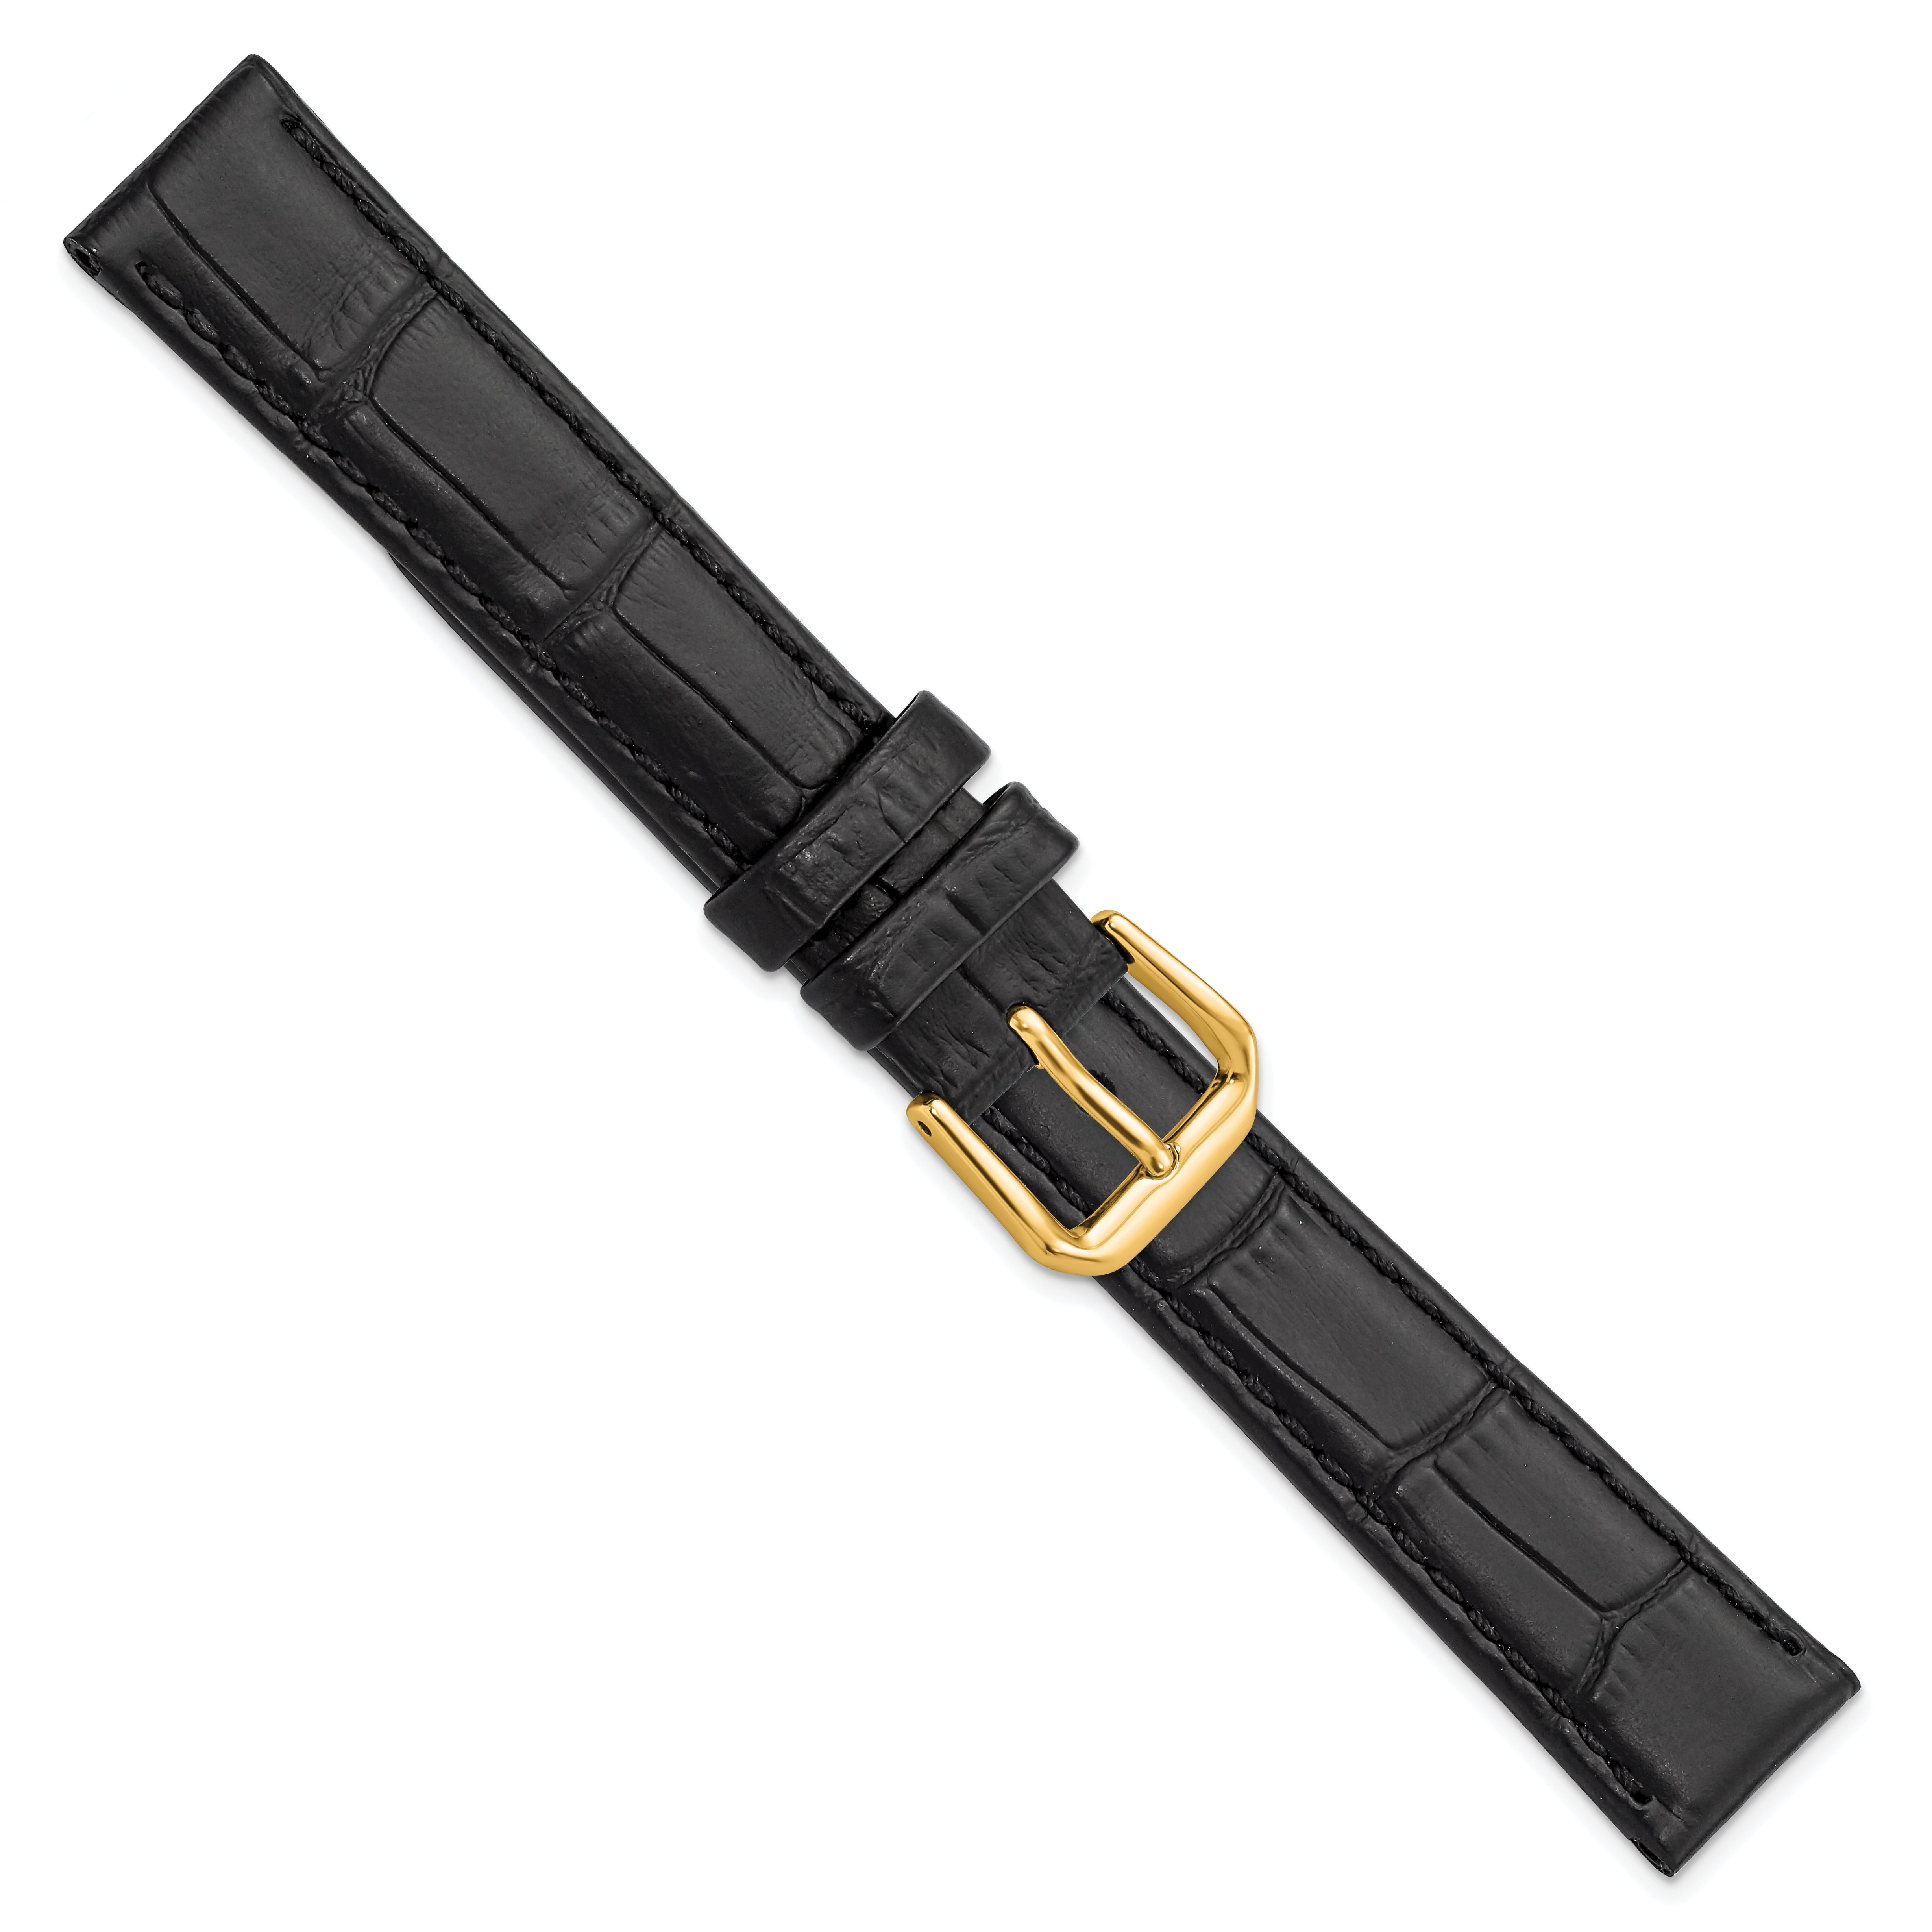 12mm Black Matte Wild Alligator Grain Leather with Gold-tone Buckle 6.75 inch Watch Band